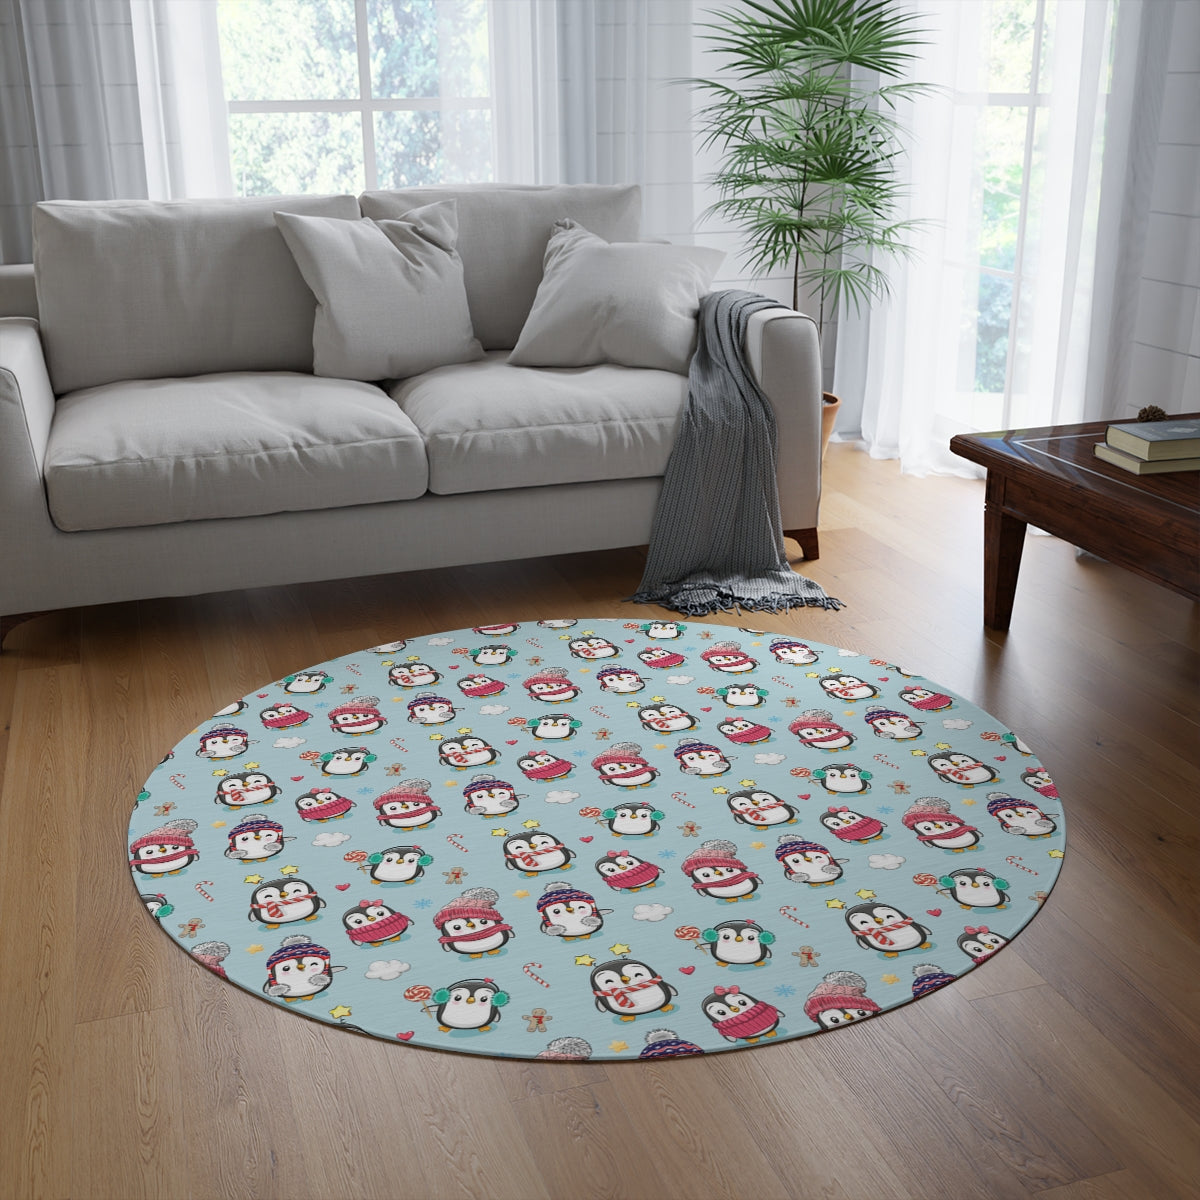 Penguins in Winter Clothes Round Rug